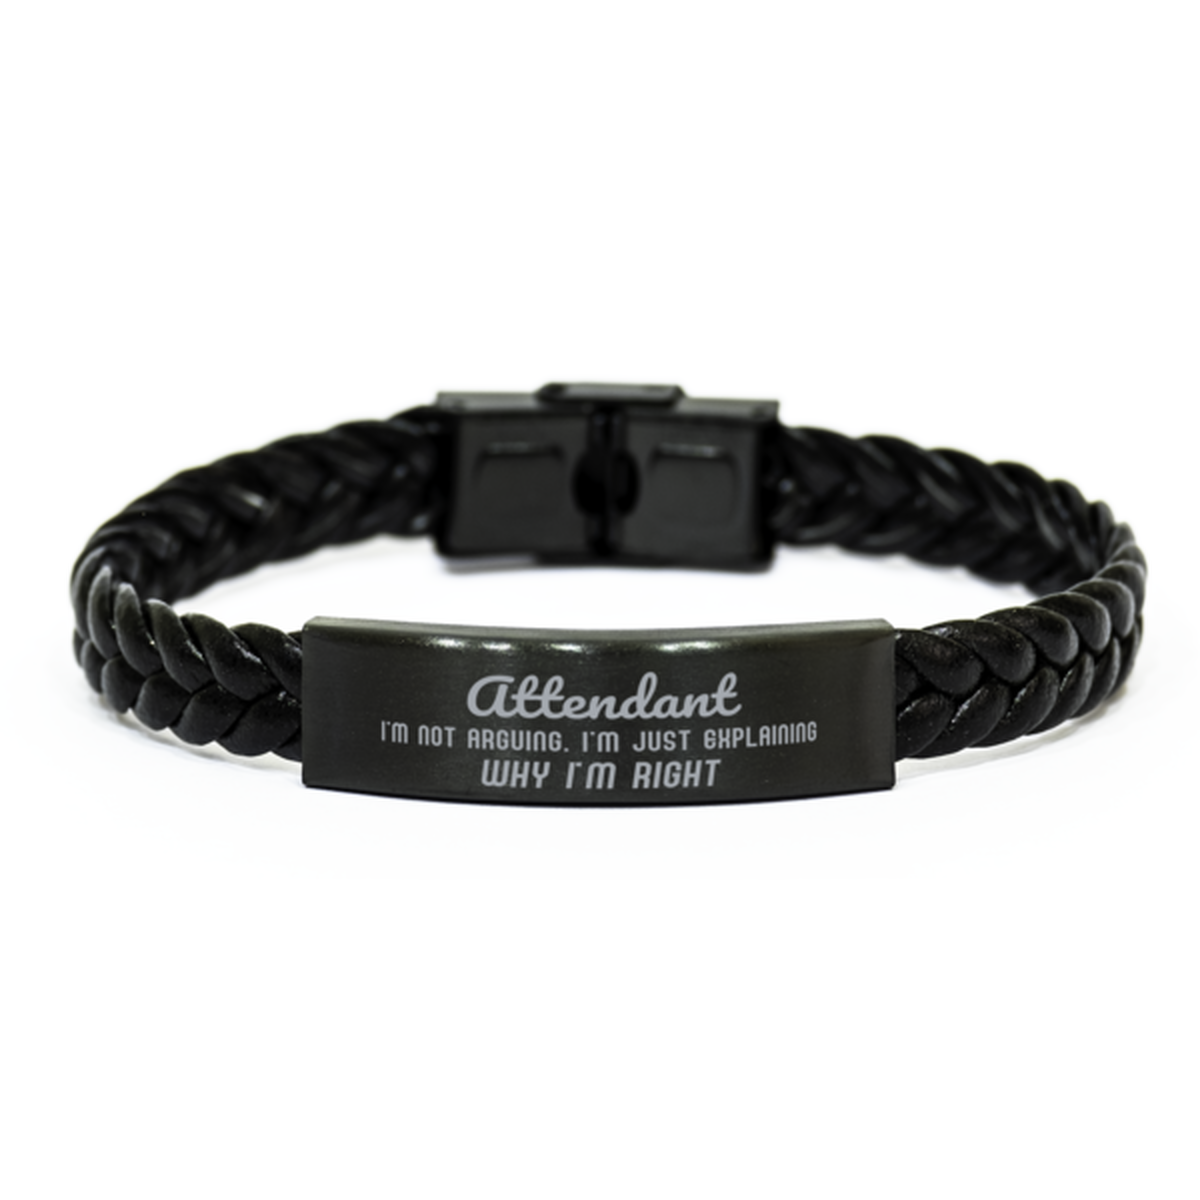 Attendant I'm not Arguing. I'm Just Explaining Why I'm RIGHT Braided Leather Bracelet, Graduation Birthday Christmas Attendant Gifts For Attendant Funny Saying Quote Present for Men Women Coworker